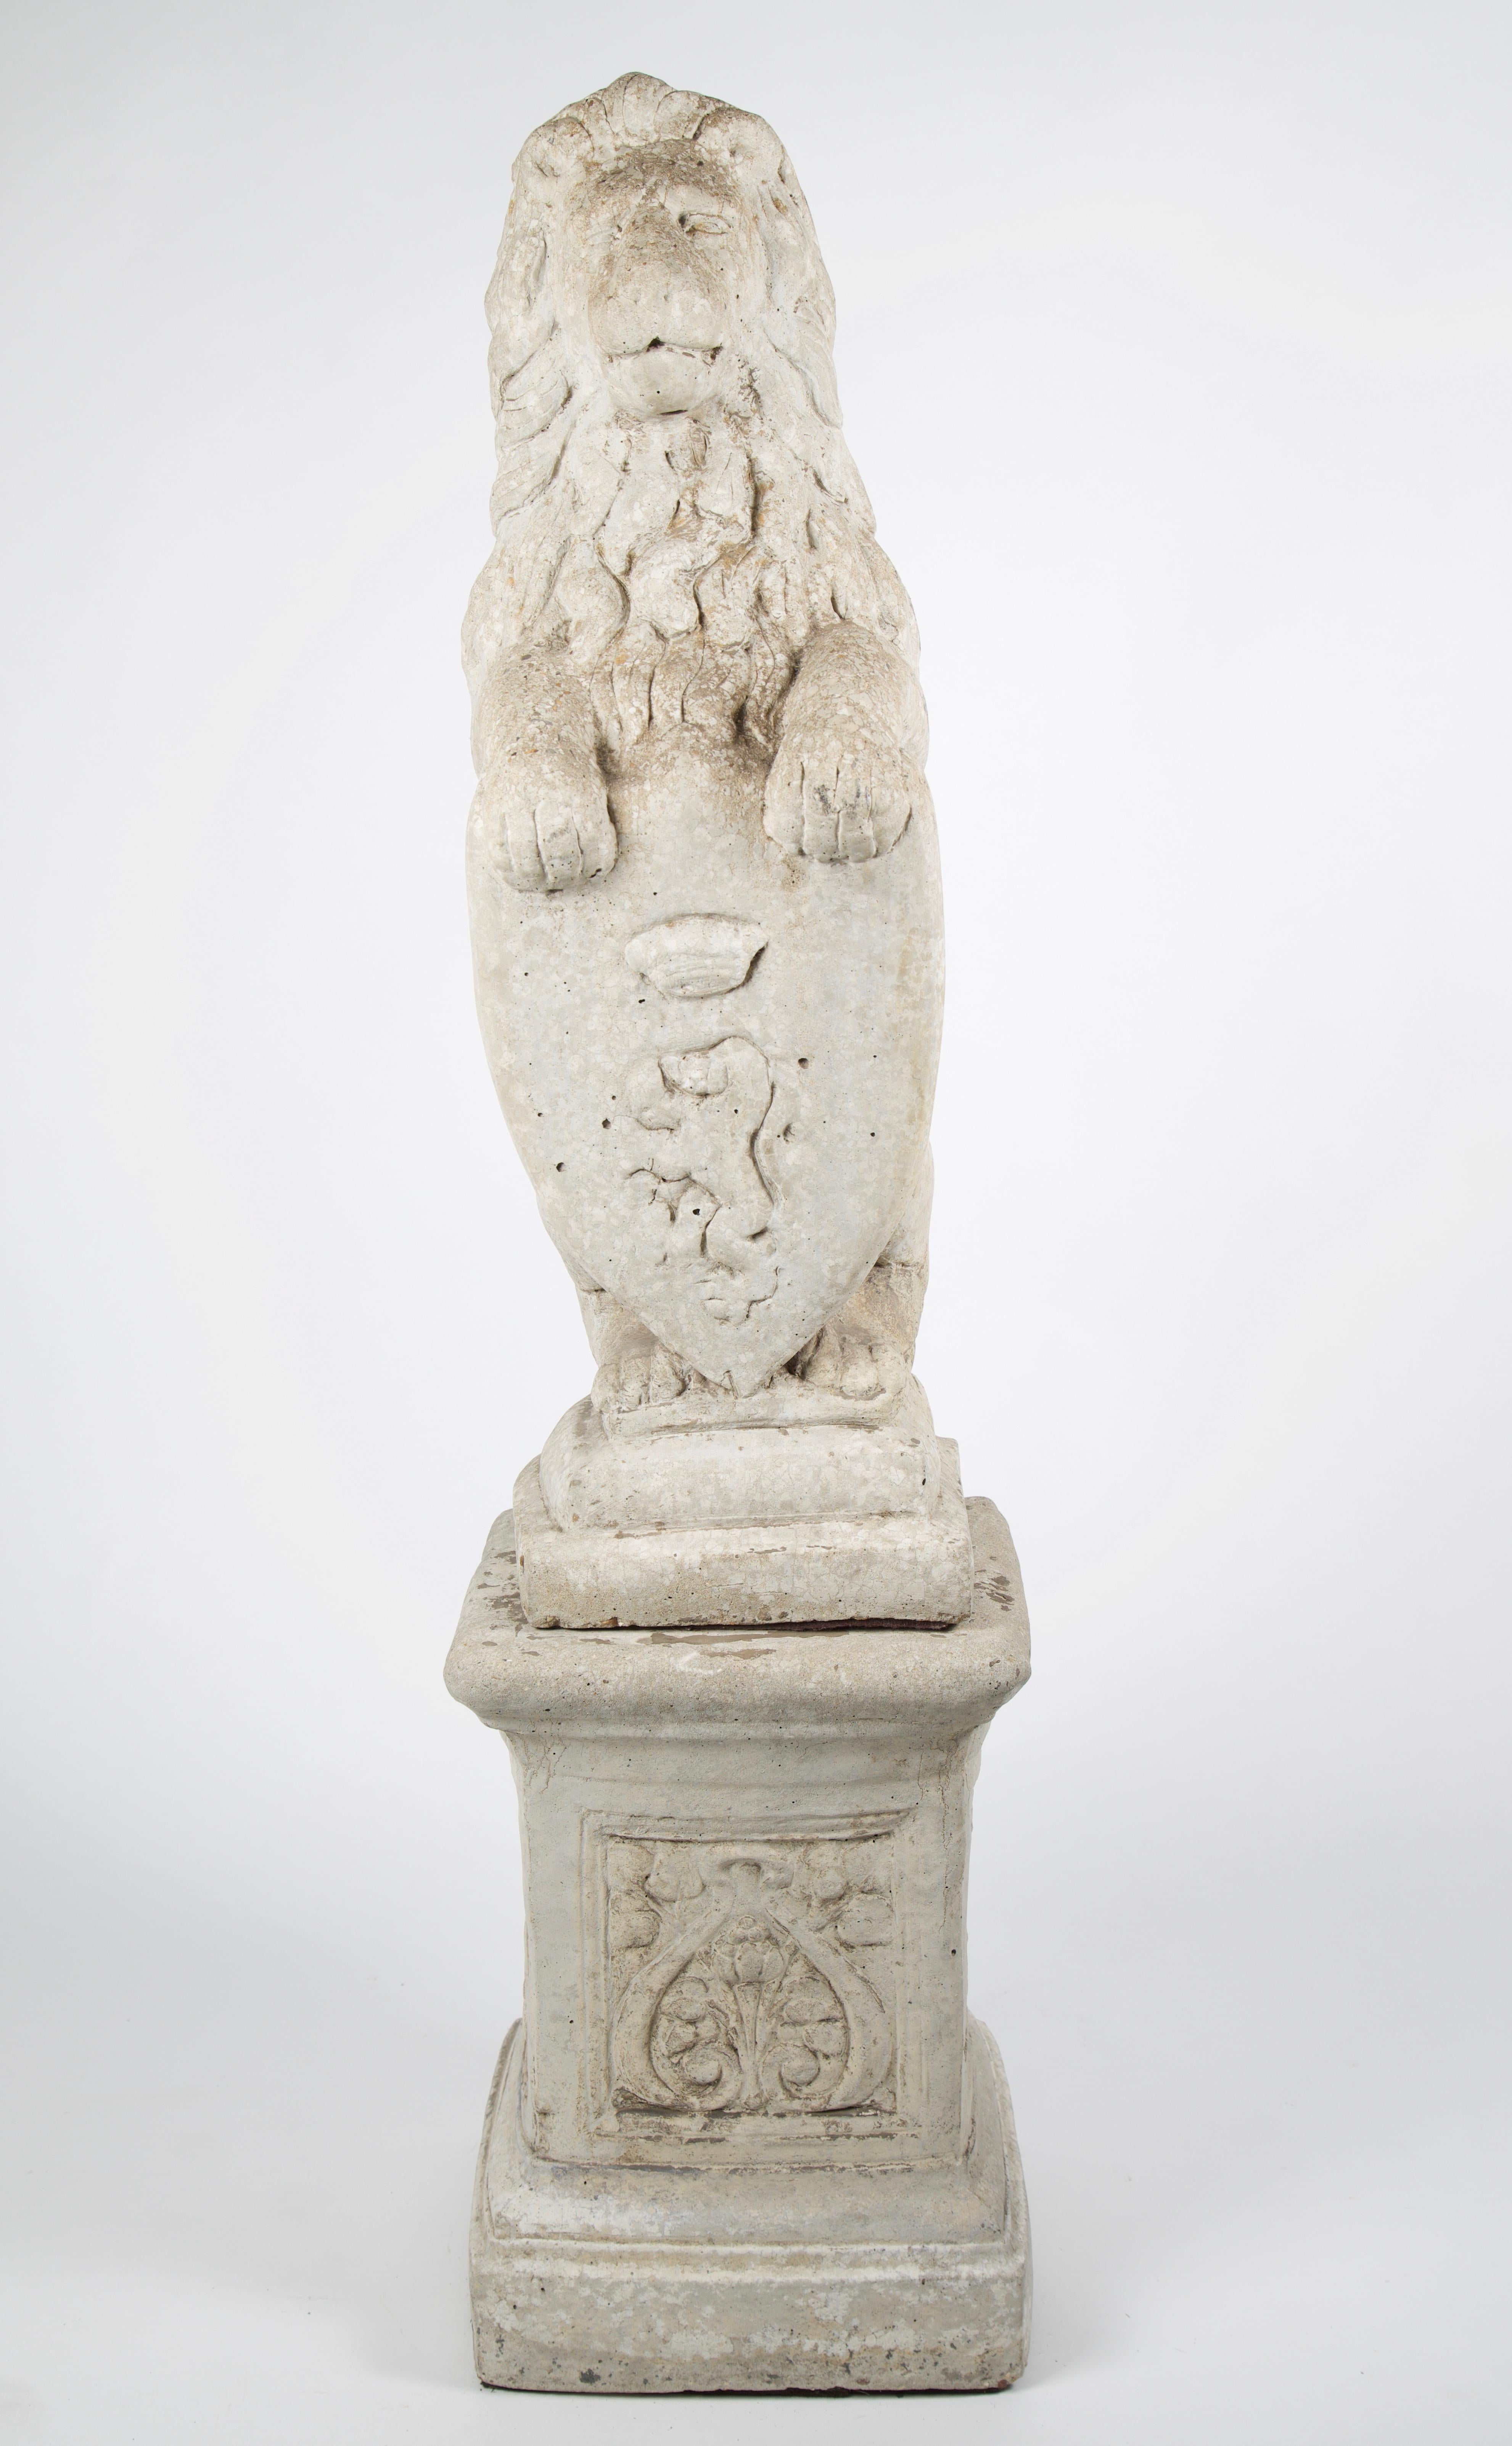 20th century French stone lion holding a shield on a pedestal. A 20th century lion carved from stone holding a crest carved with a lion with wearing a crown. It is a representation of power having exquisite detail while sitting atop a plinth base